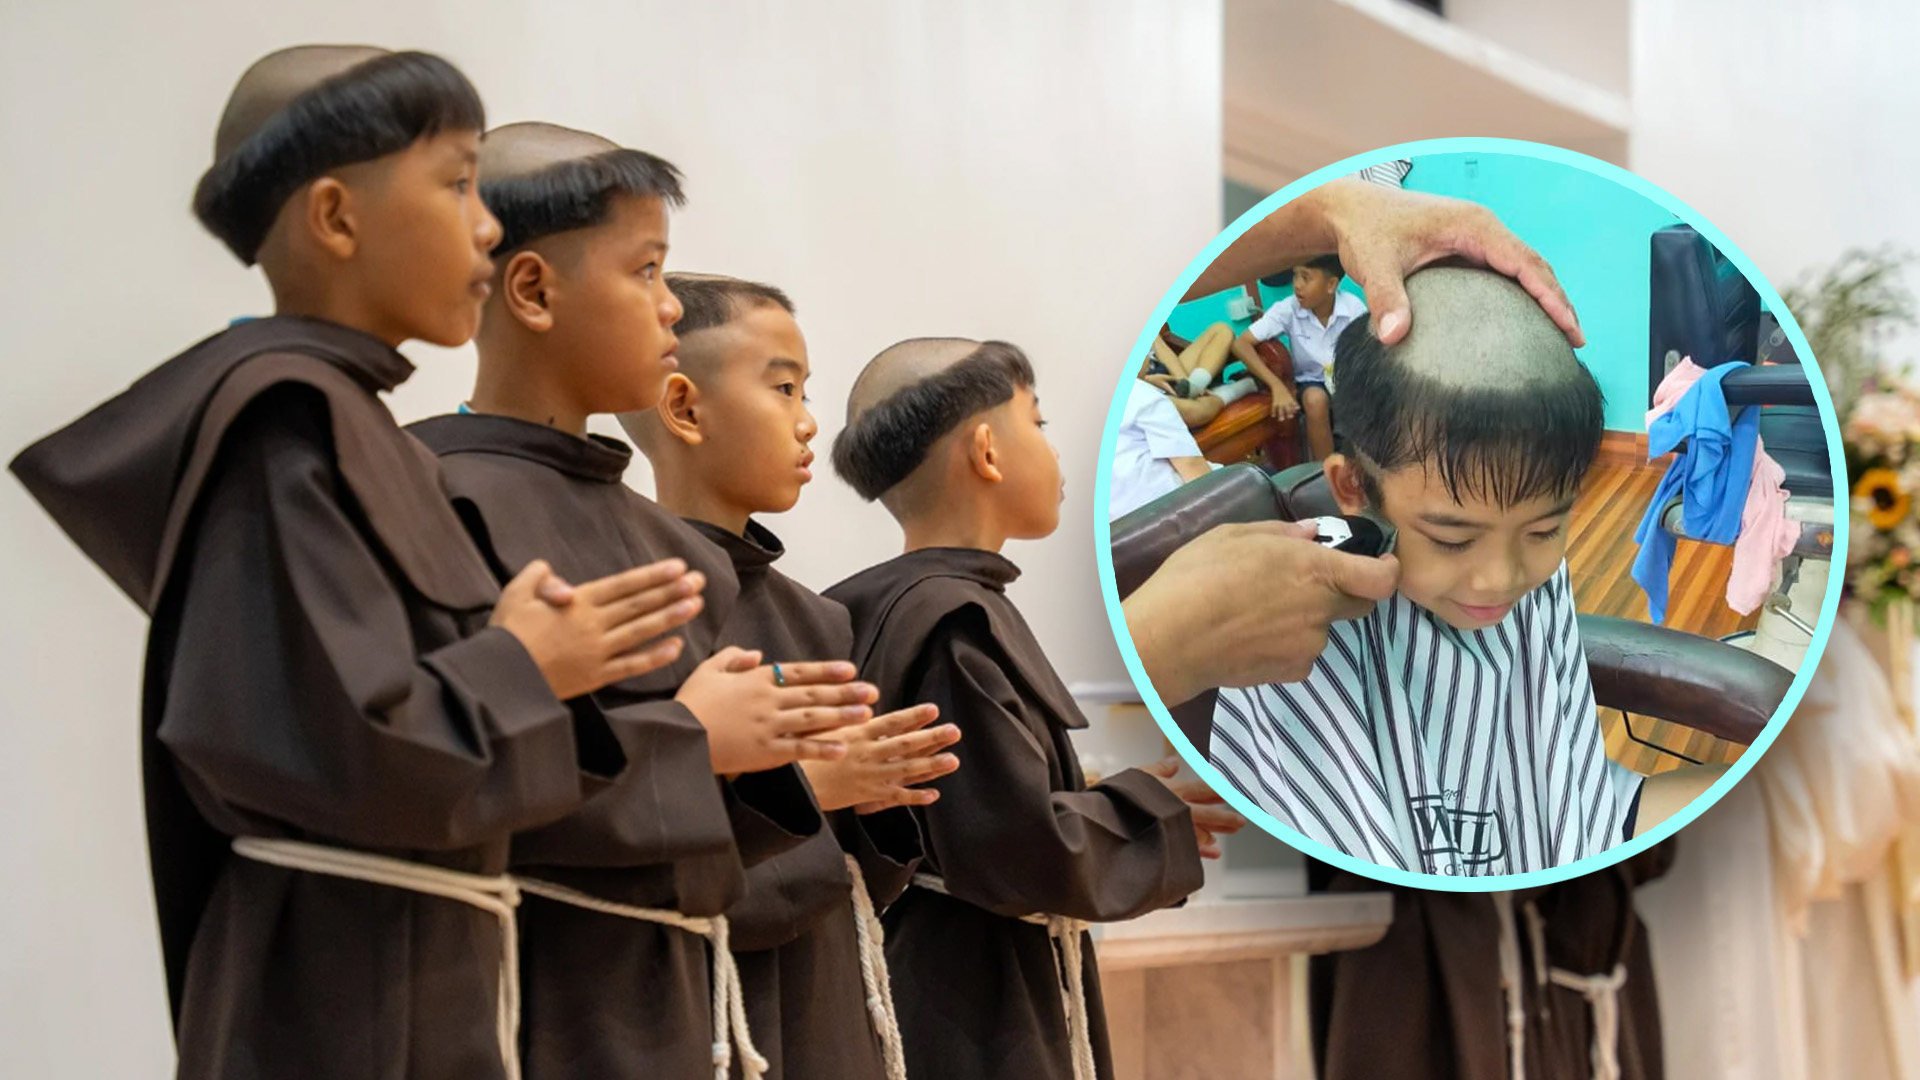 A Catholic church in Thailand faced criticism for providing students with “embarrassing” haircuts resembling those of 4th-century friar tuck monks. Photo: SCMP composite/Facebook